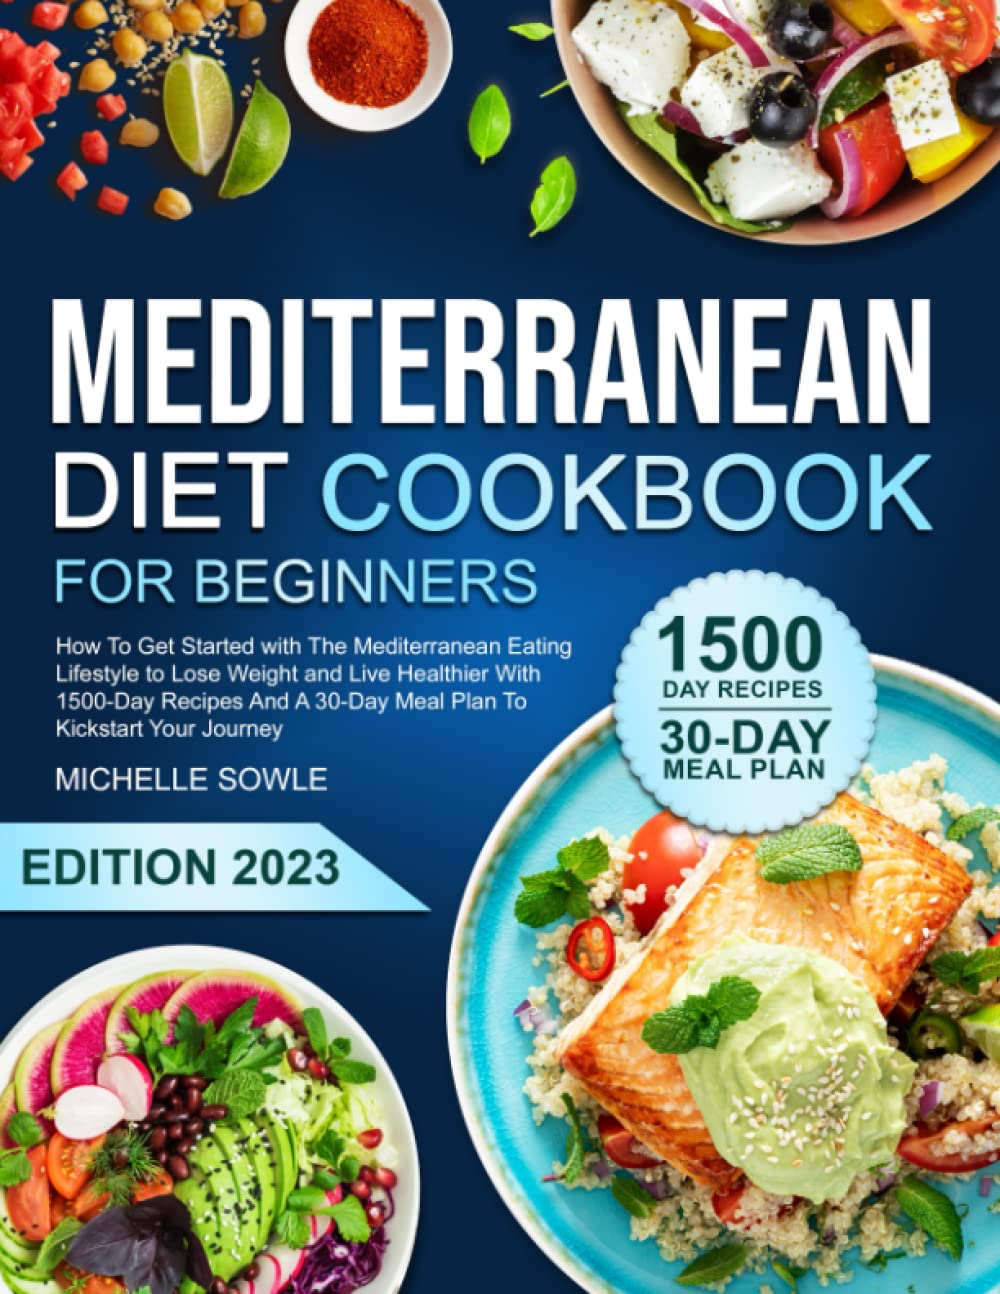 MEDITERRANEAN DIET COOKBOOK FOR BEGINNERS: How To Get Started with Mediterranean Eating Lifestyle to Lose Weight, Live Healthier With 1500-Day Recipes and a 30-Day Meal Plan To Kickstart Your Journey